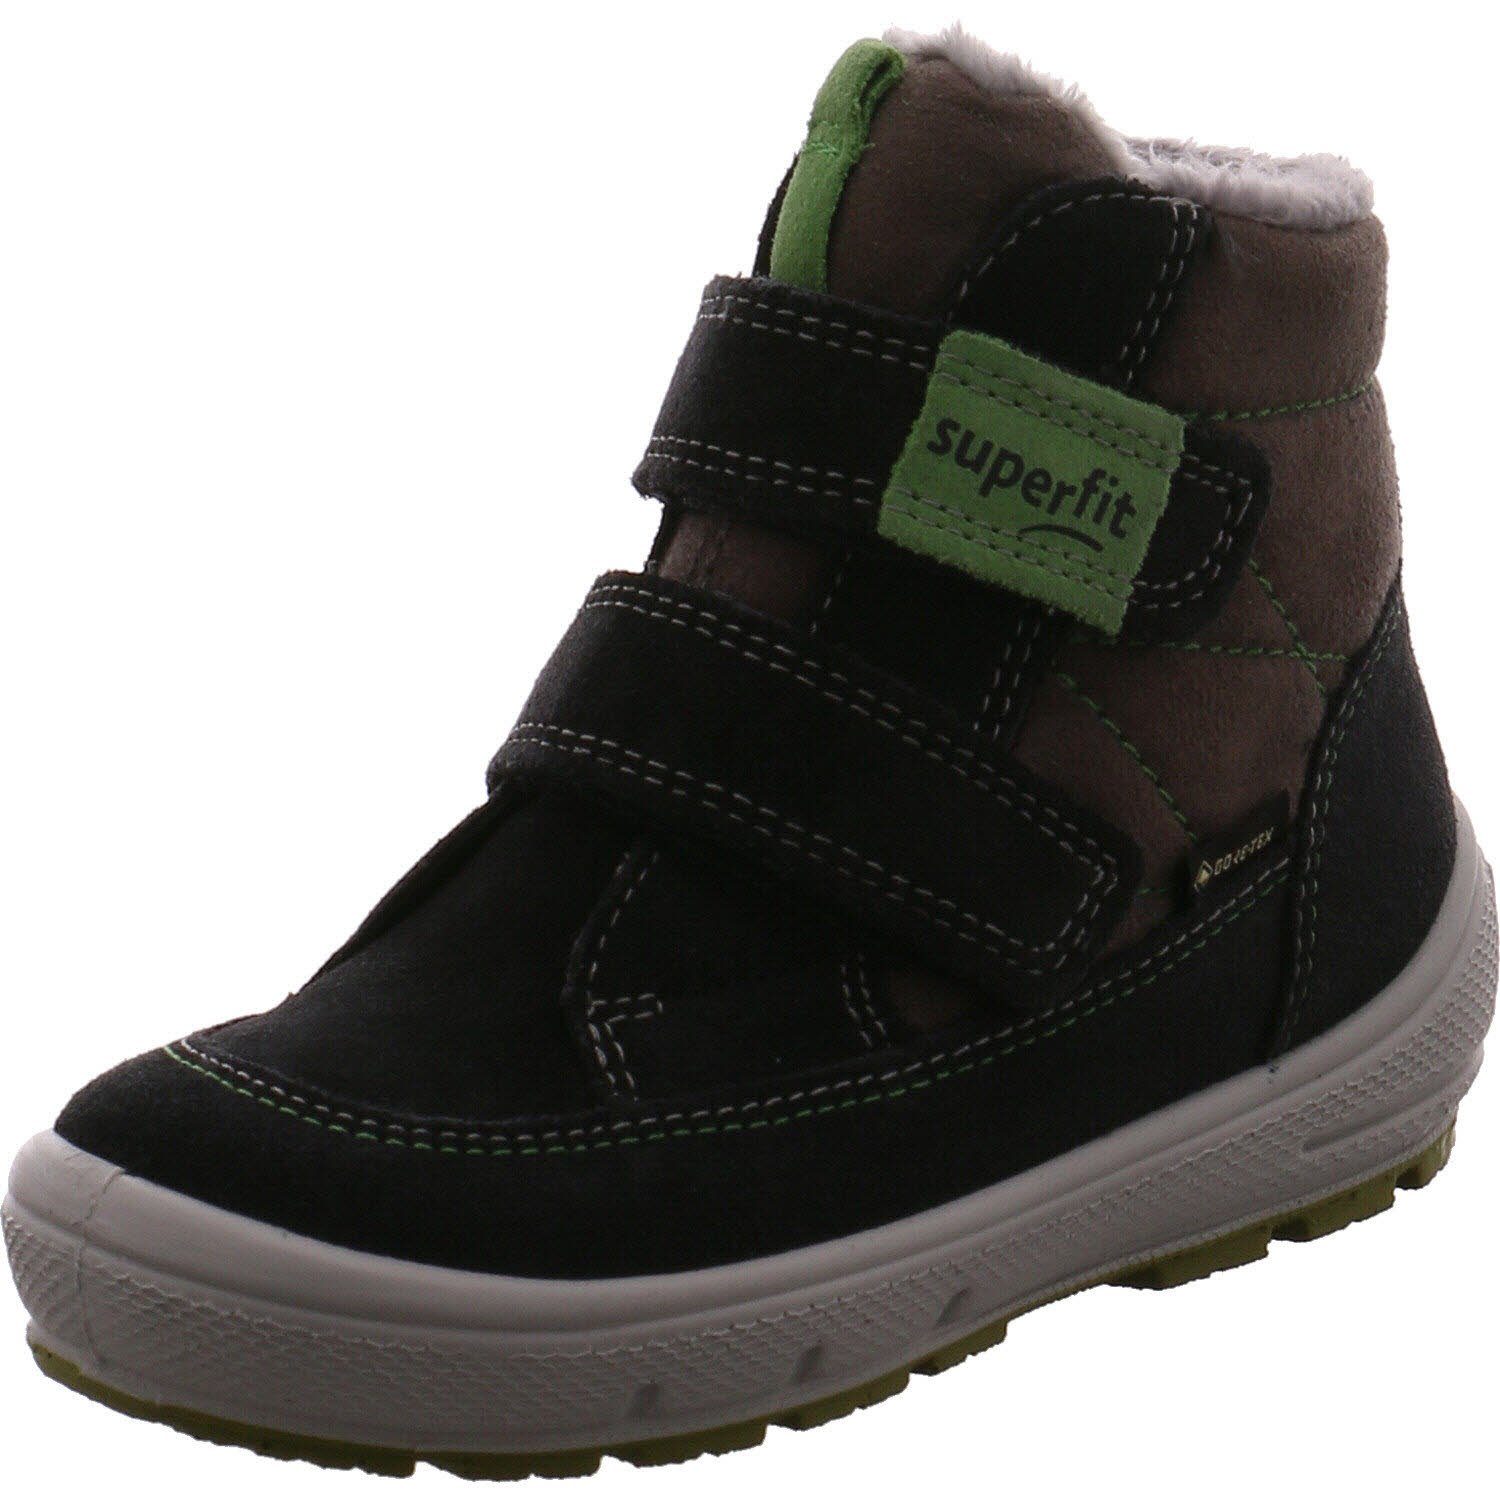 Superfit Groovy Stiefel